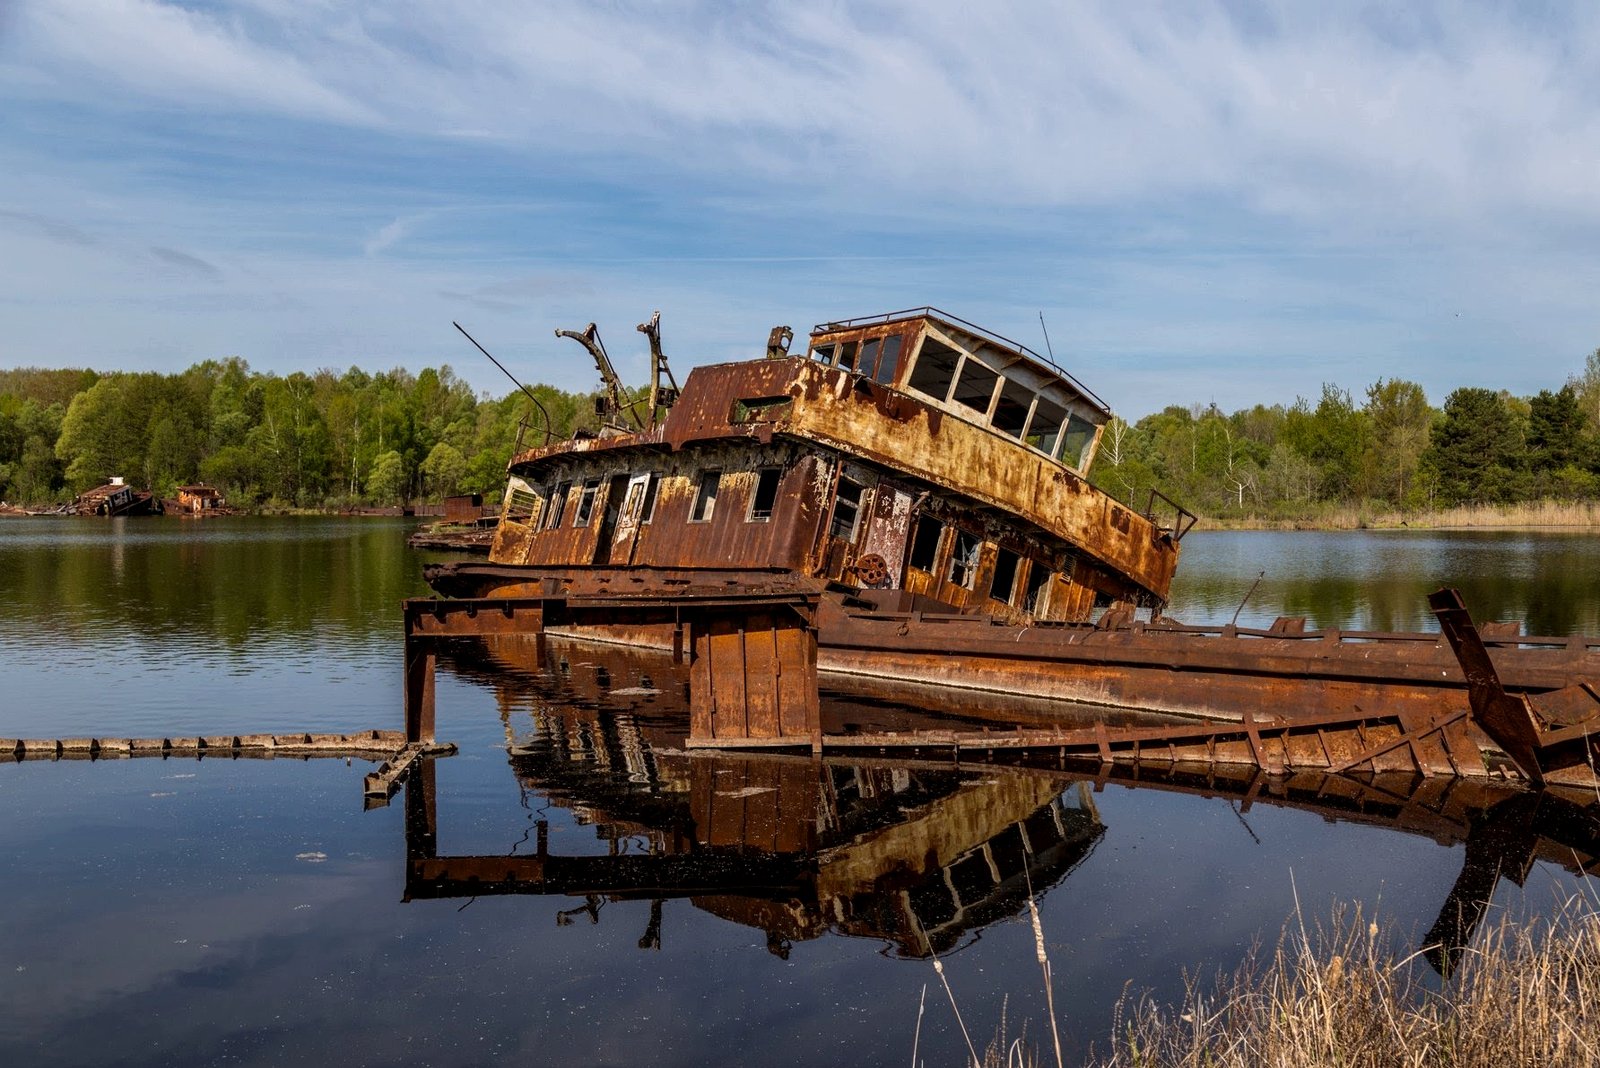 Cemetery of barges and abandoned ships, Chernobyl